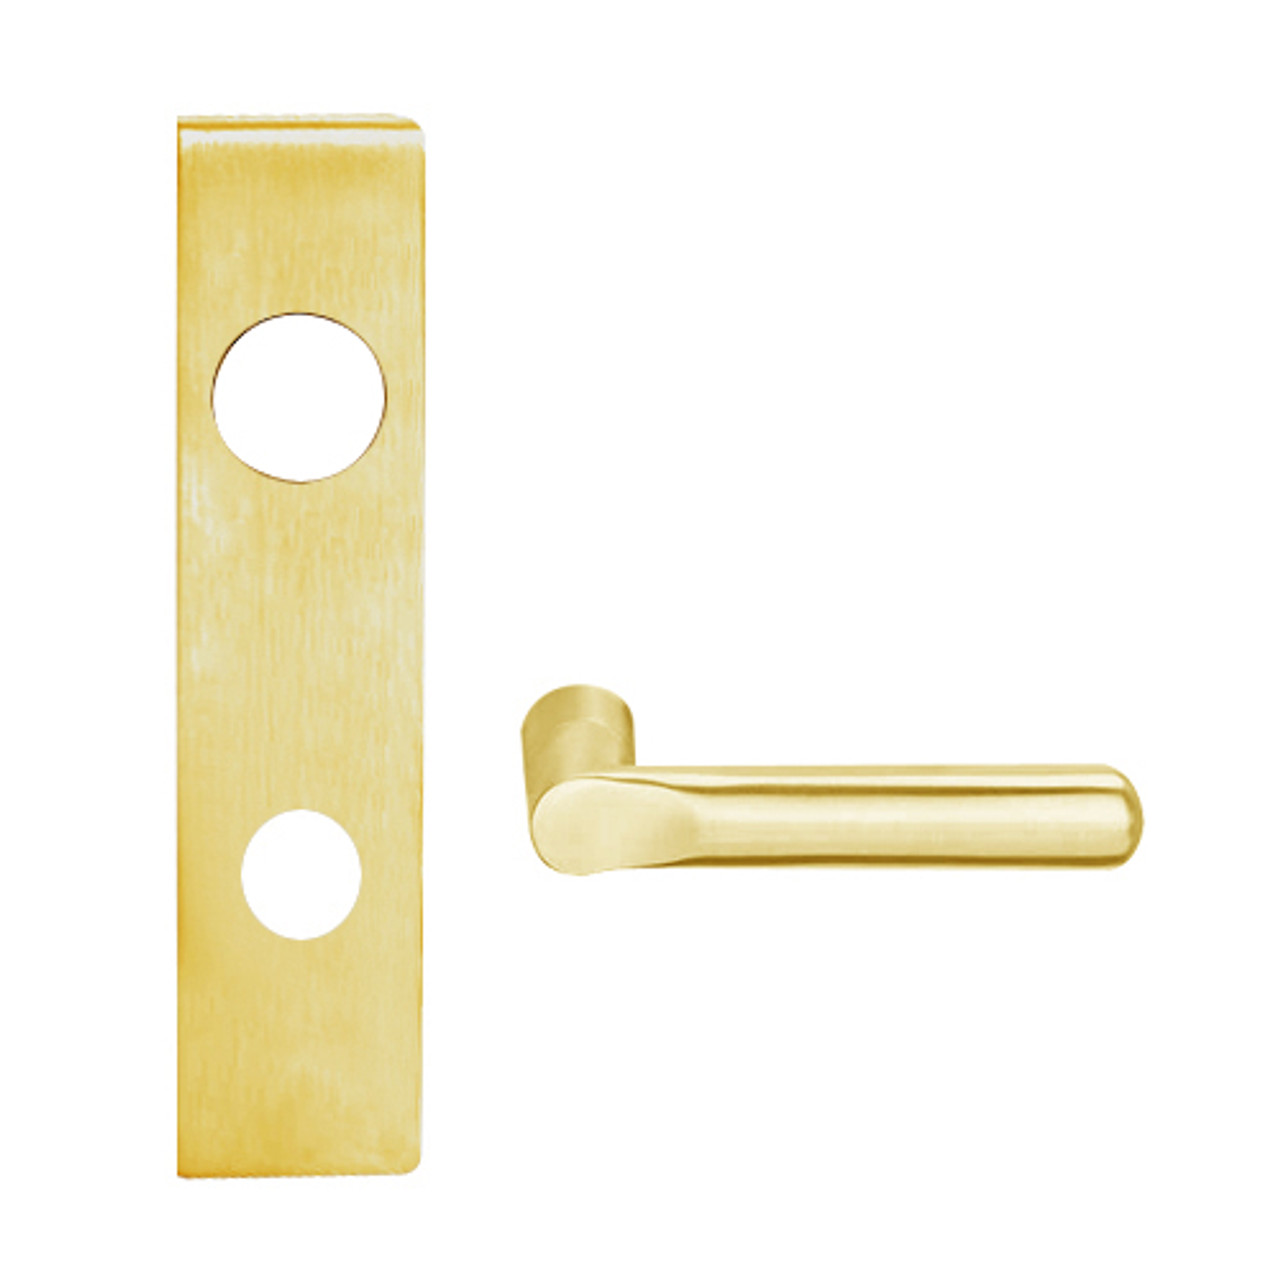 L9050J-18L-605 Schlage L Series Entrance Commercial Mortise Lock with 18 Cast Lever Design Prepped for FSIC in Bright Brass